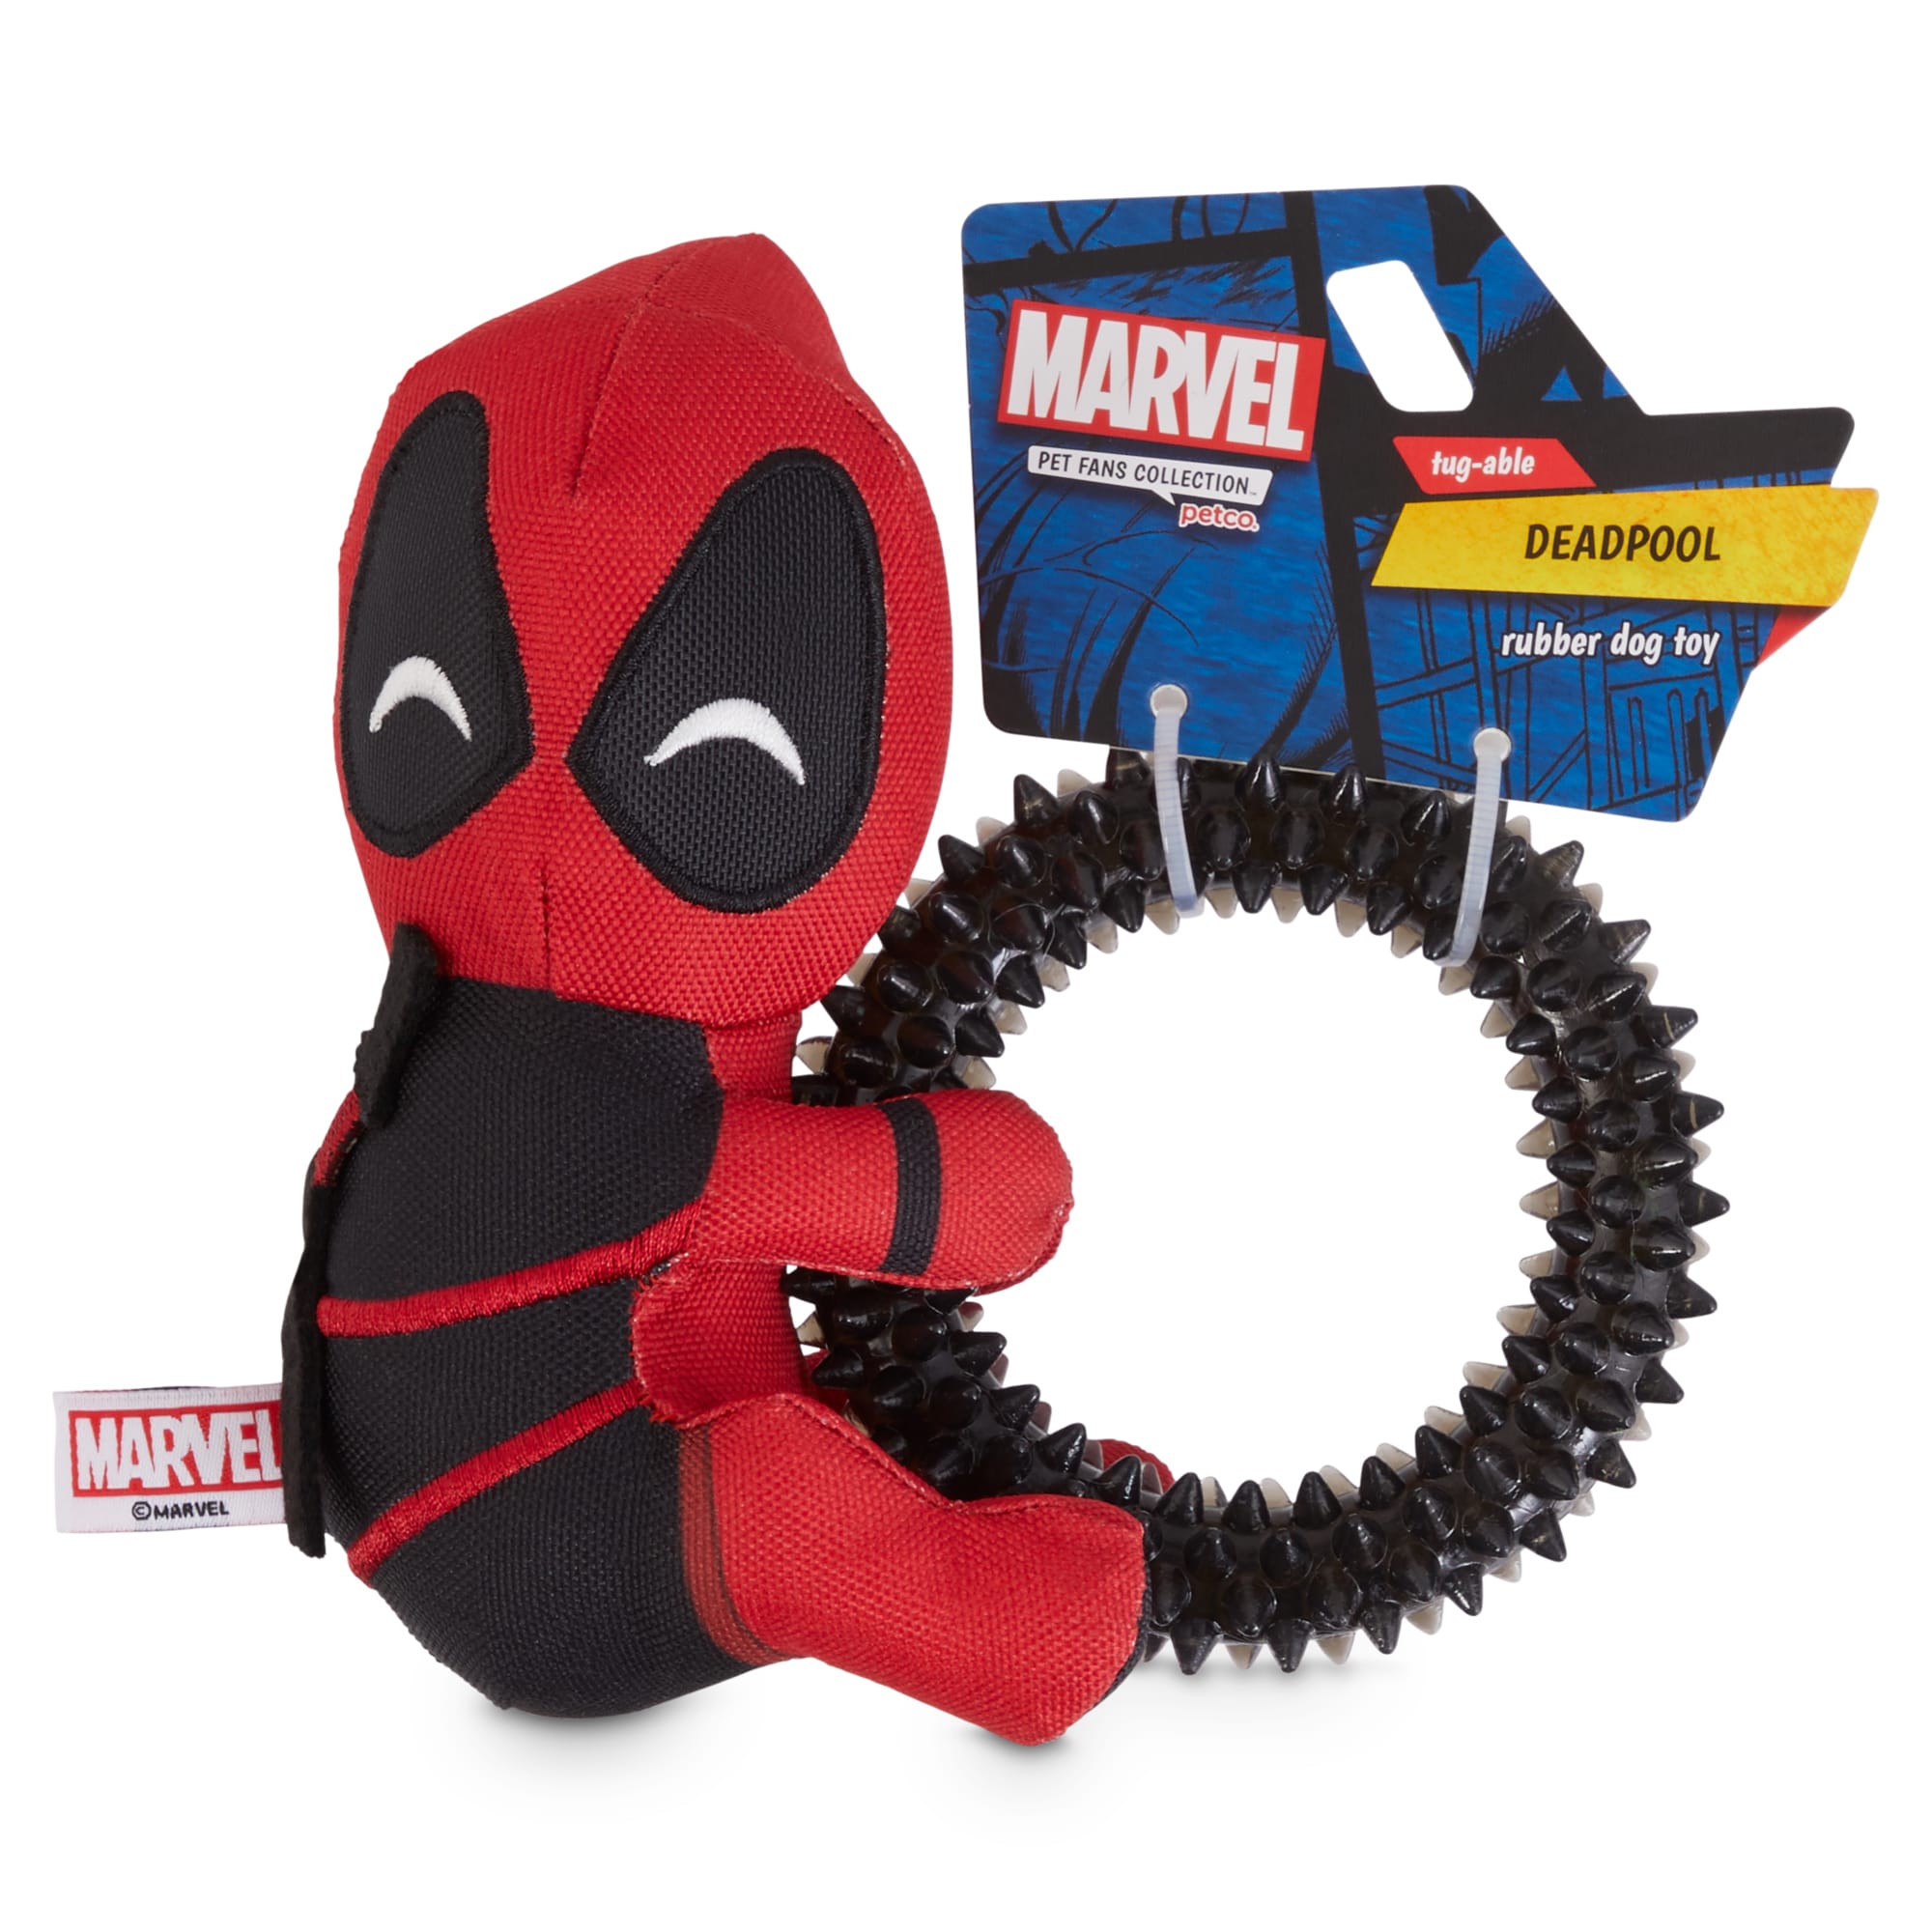 Marvel Deadpool Rubber Dog Toy, Small Petco